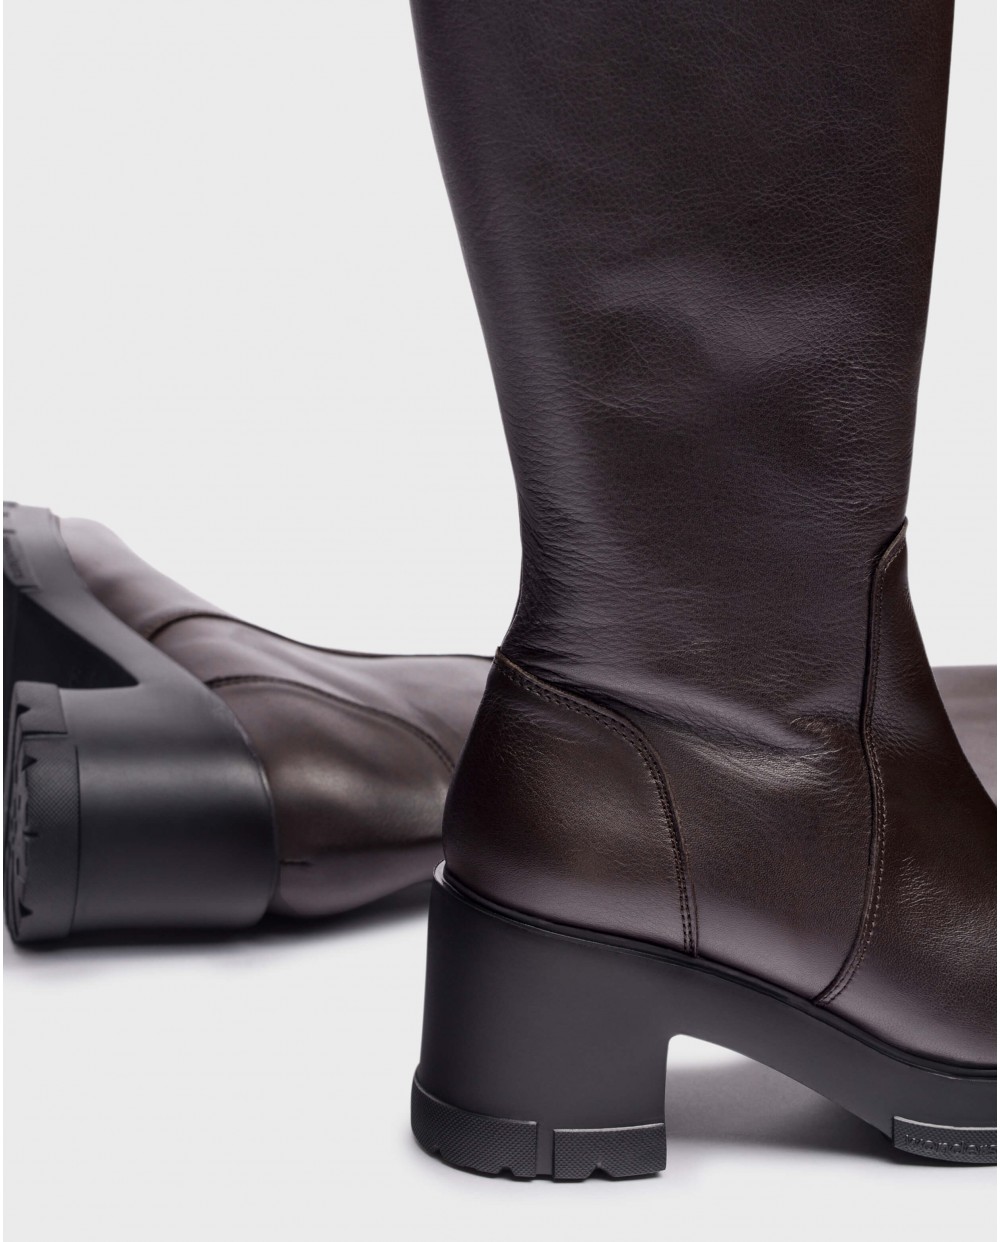 Wonders-Boots-Black leather boot with track sole